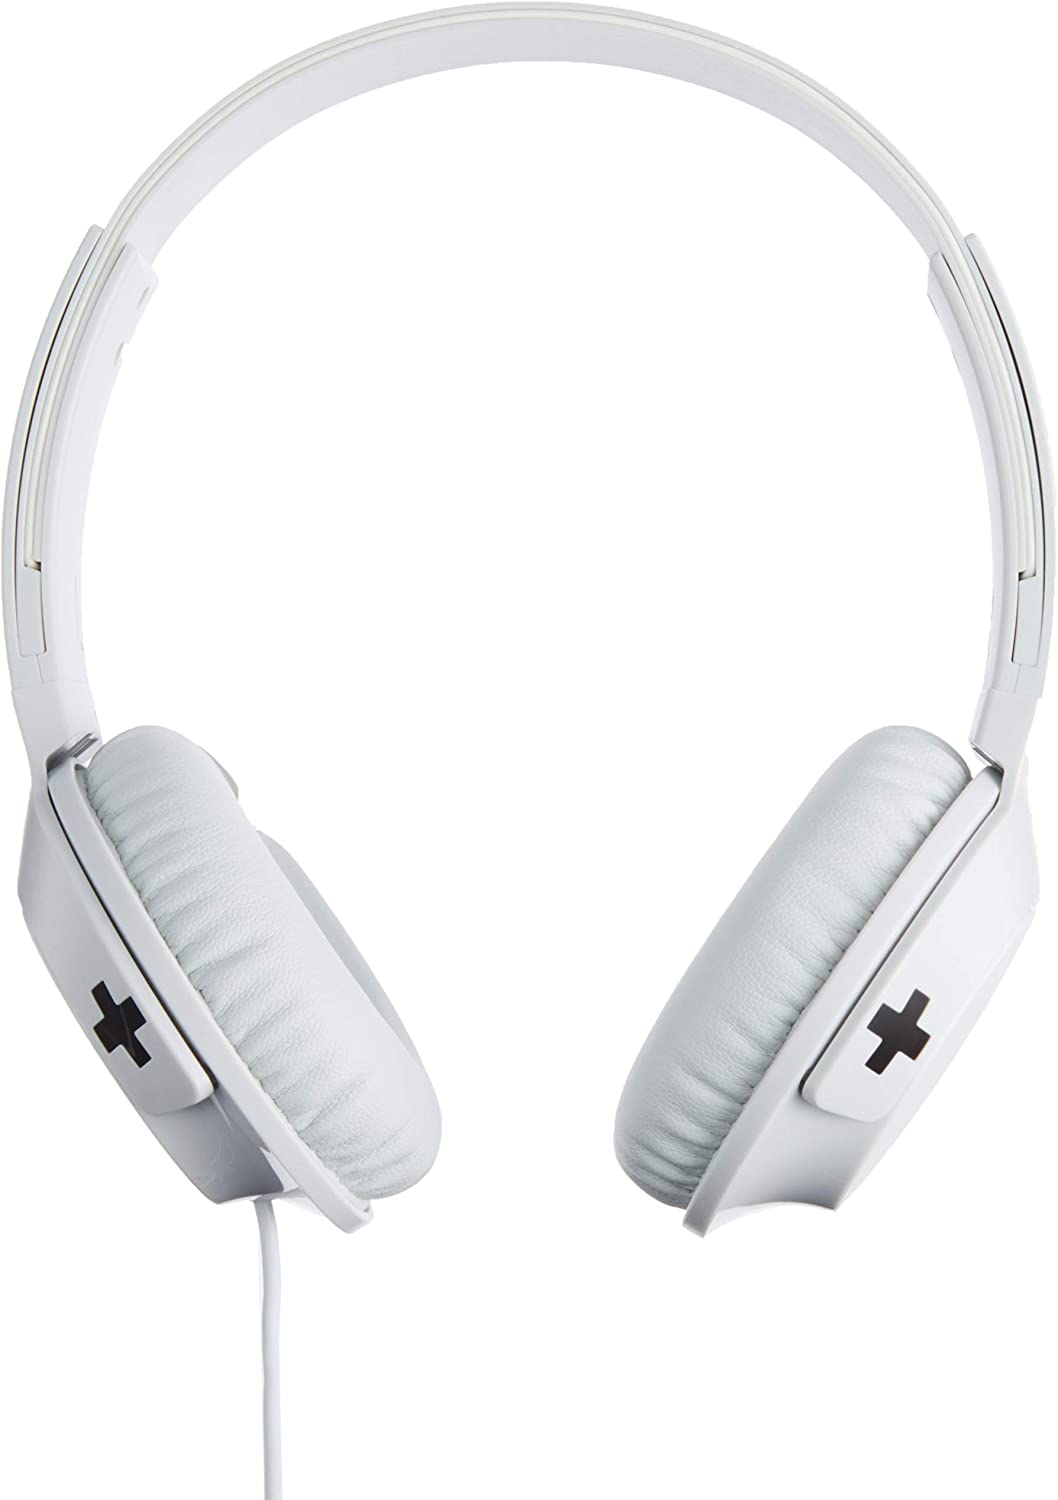 PHILIPS SHL3075WT BASS+ ON-EAR HEADPHONES WITH MIC - WHITE [ACCESSORIES]